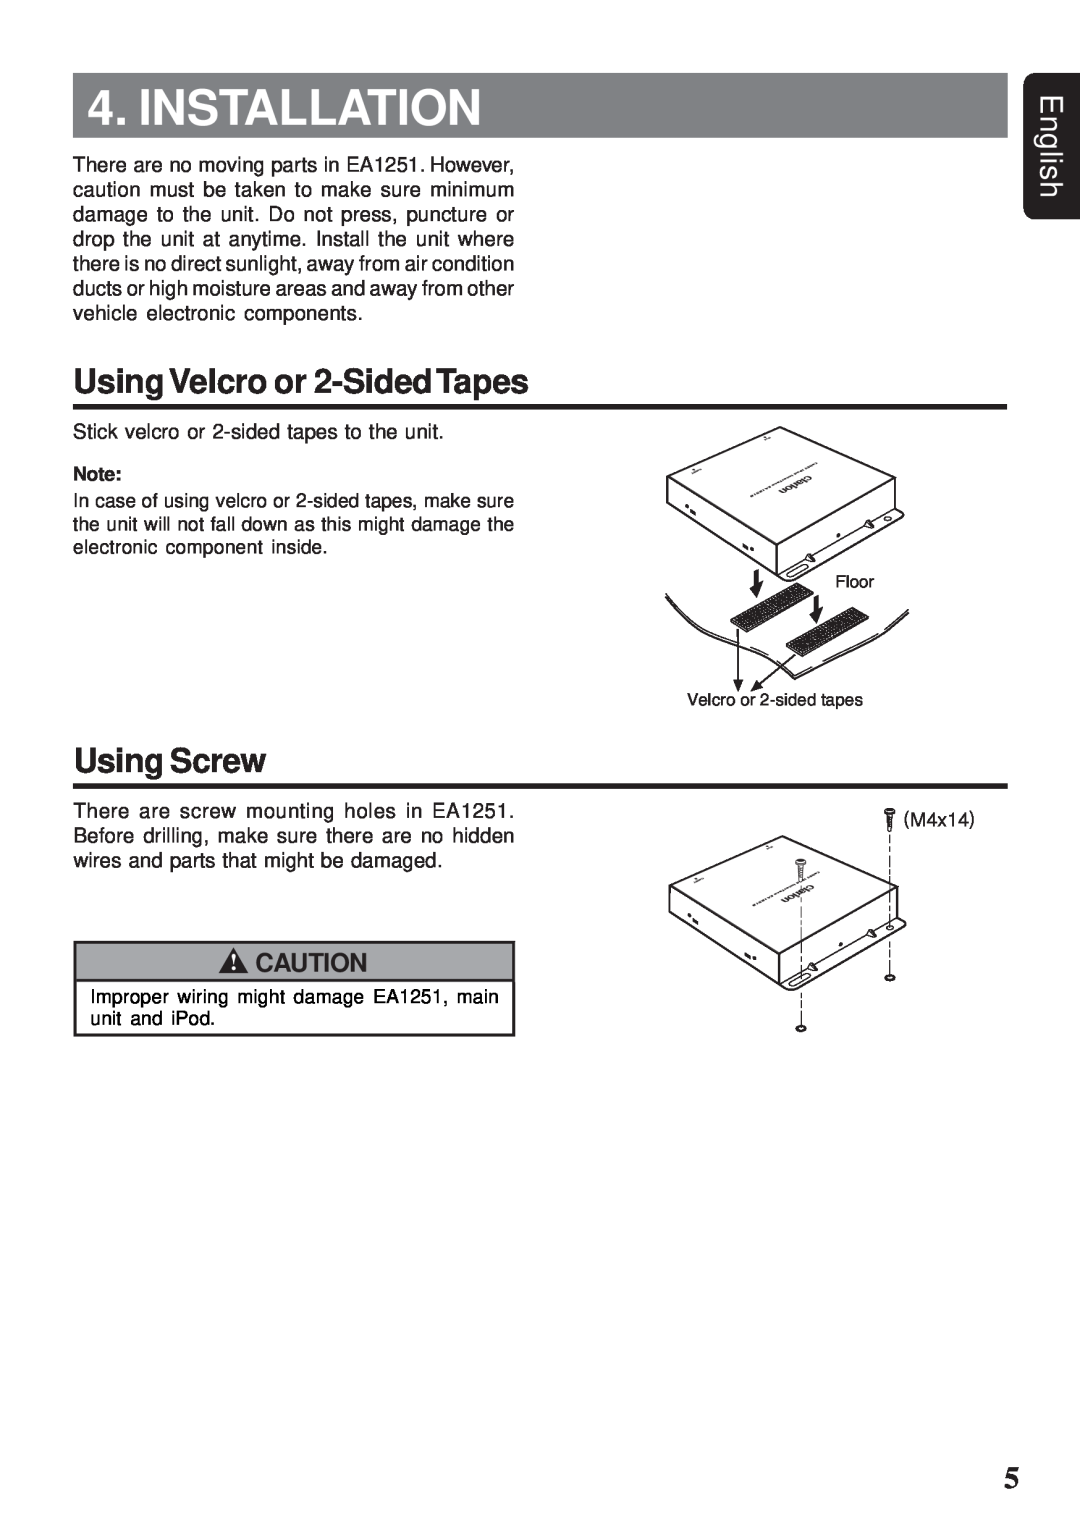 Clarion EA1251 owner manual Installation, Using Velcro or 2-SidedTapes, Using Screw, English 